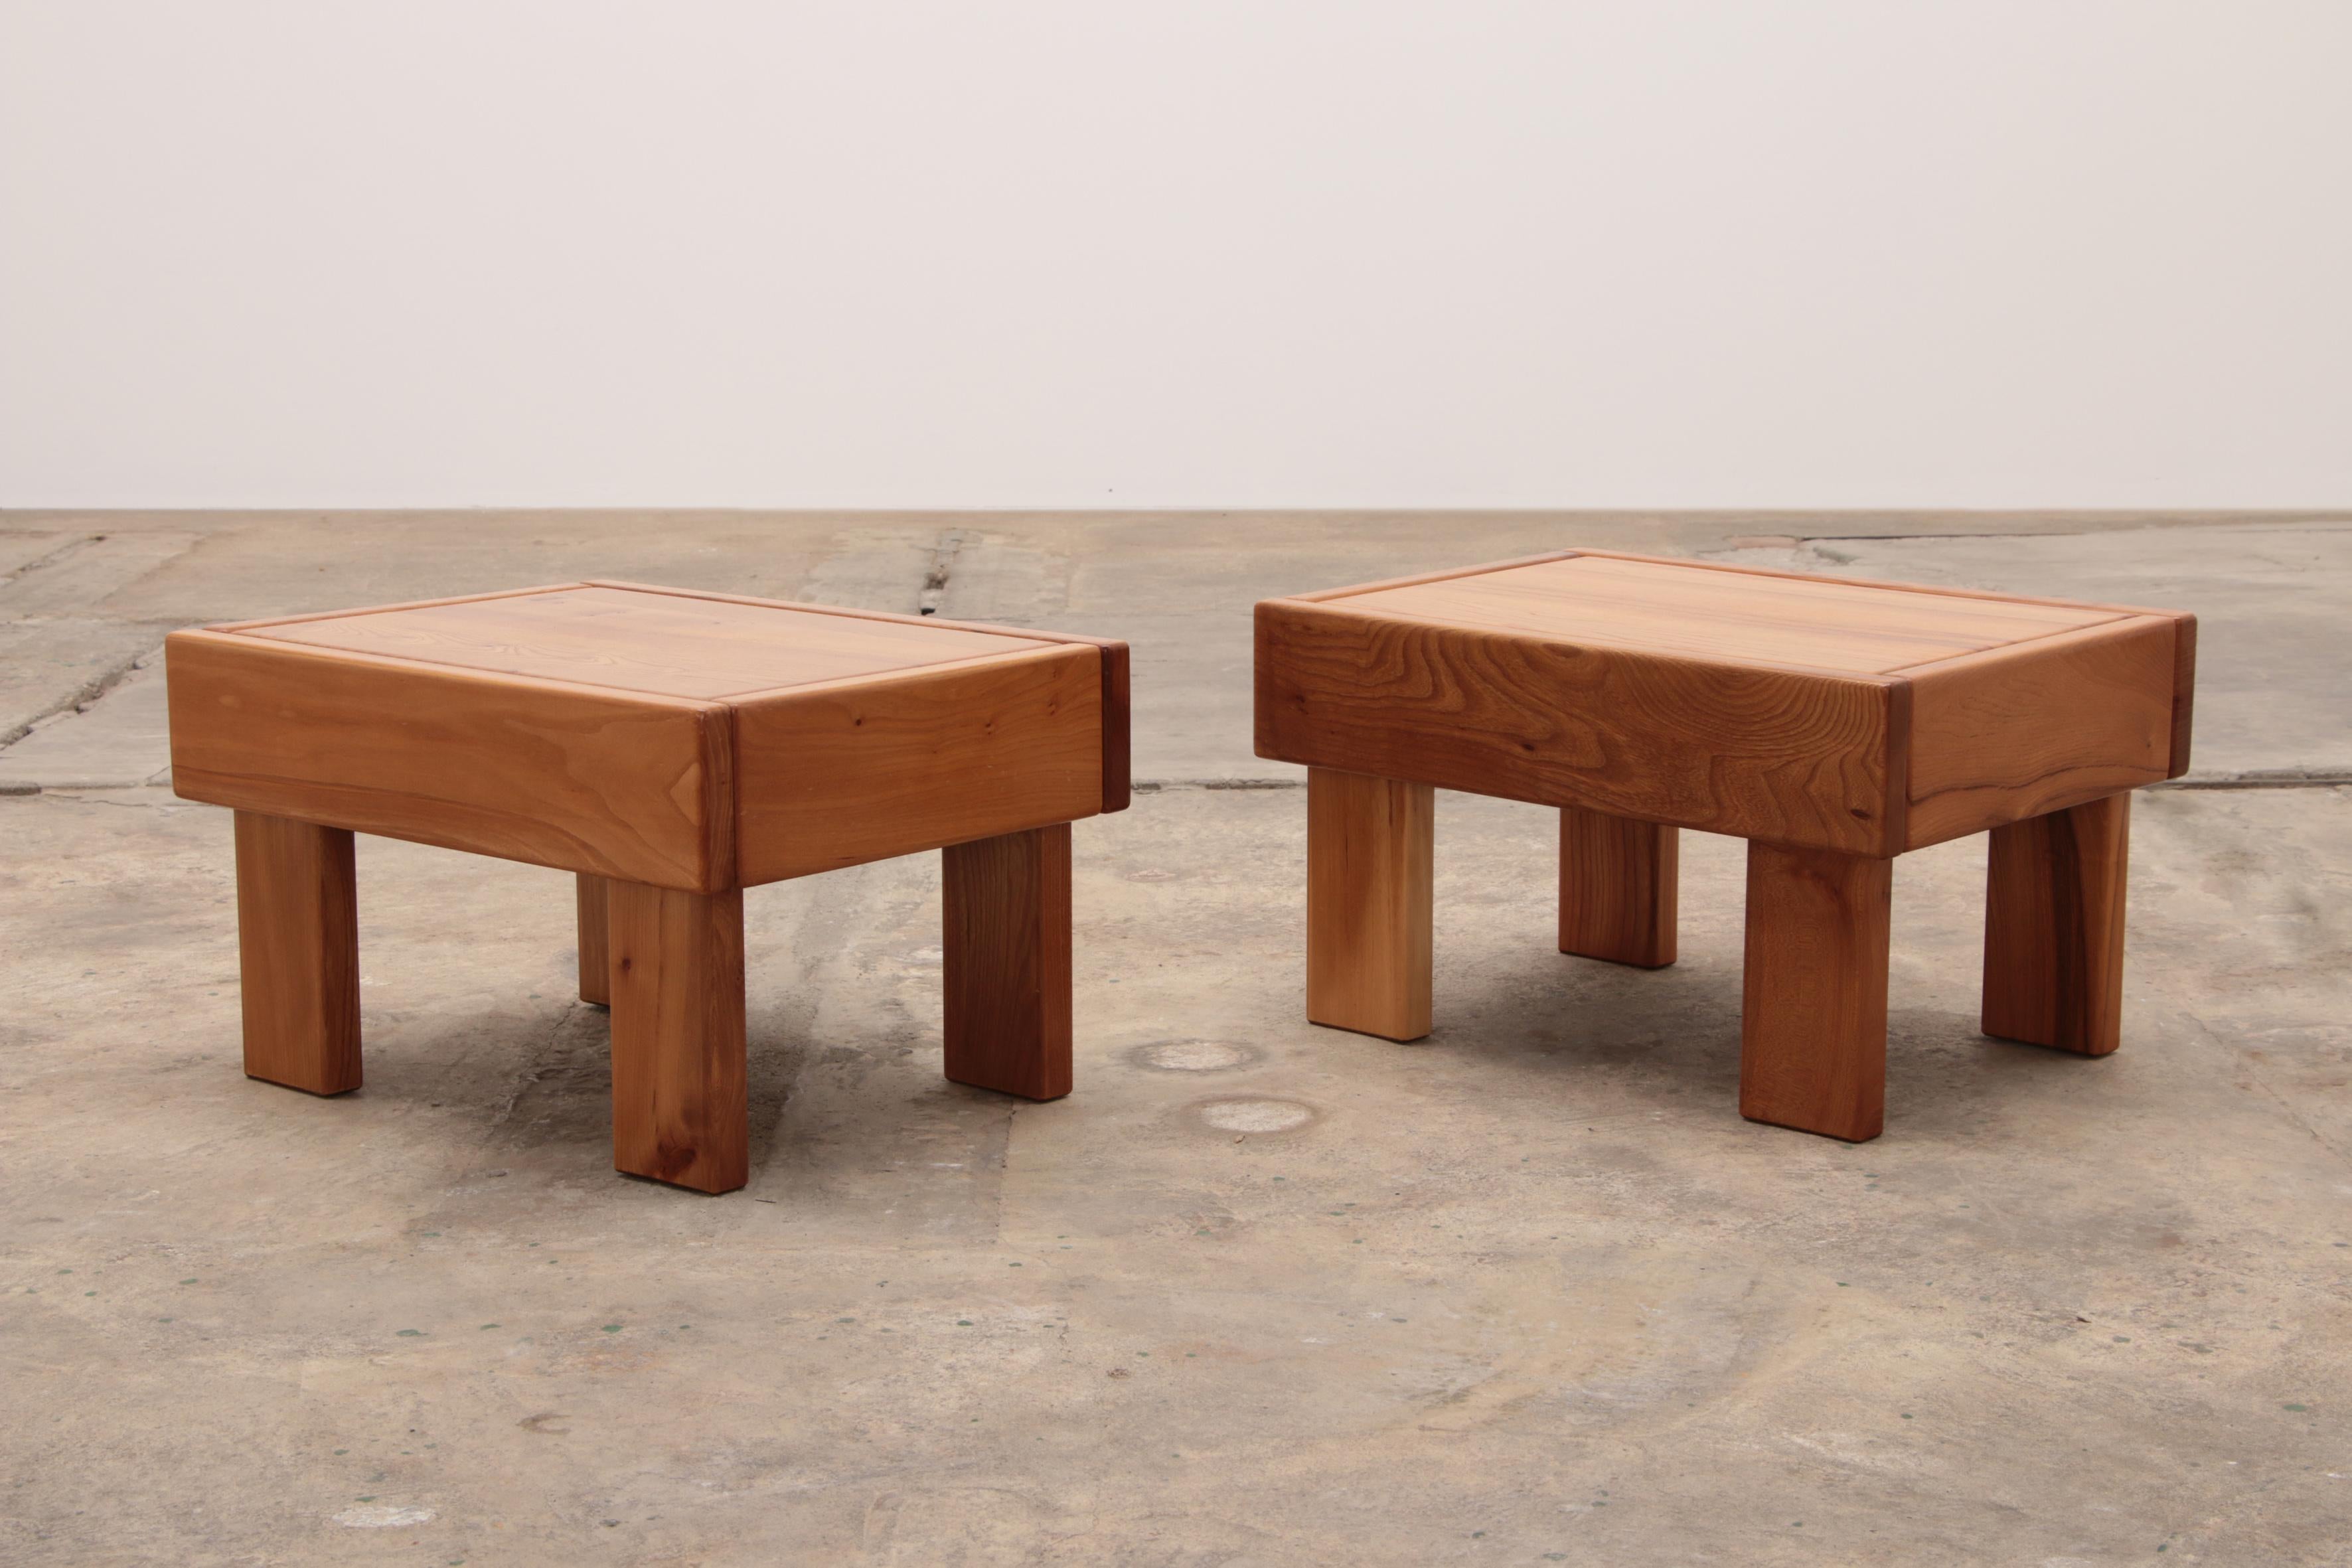 Maison Regain Set of Elm Wood Tables from the 1970s, France 2